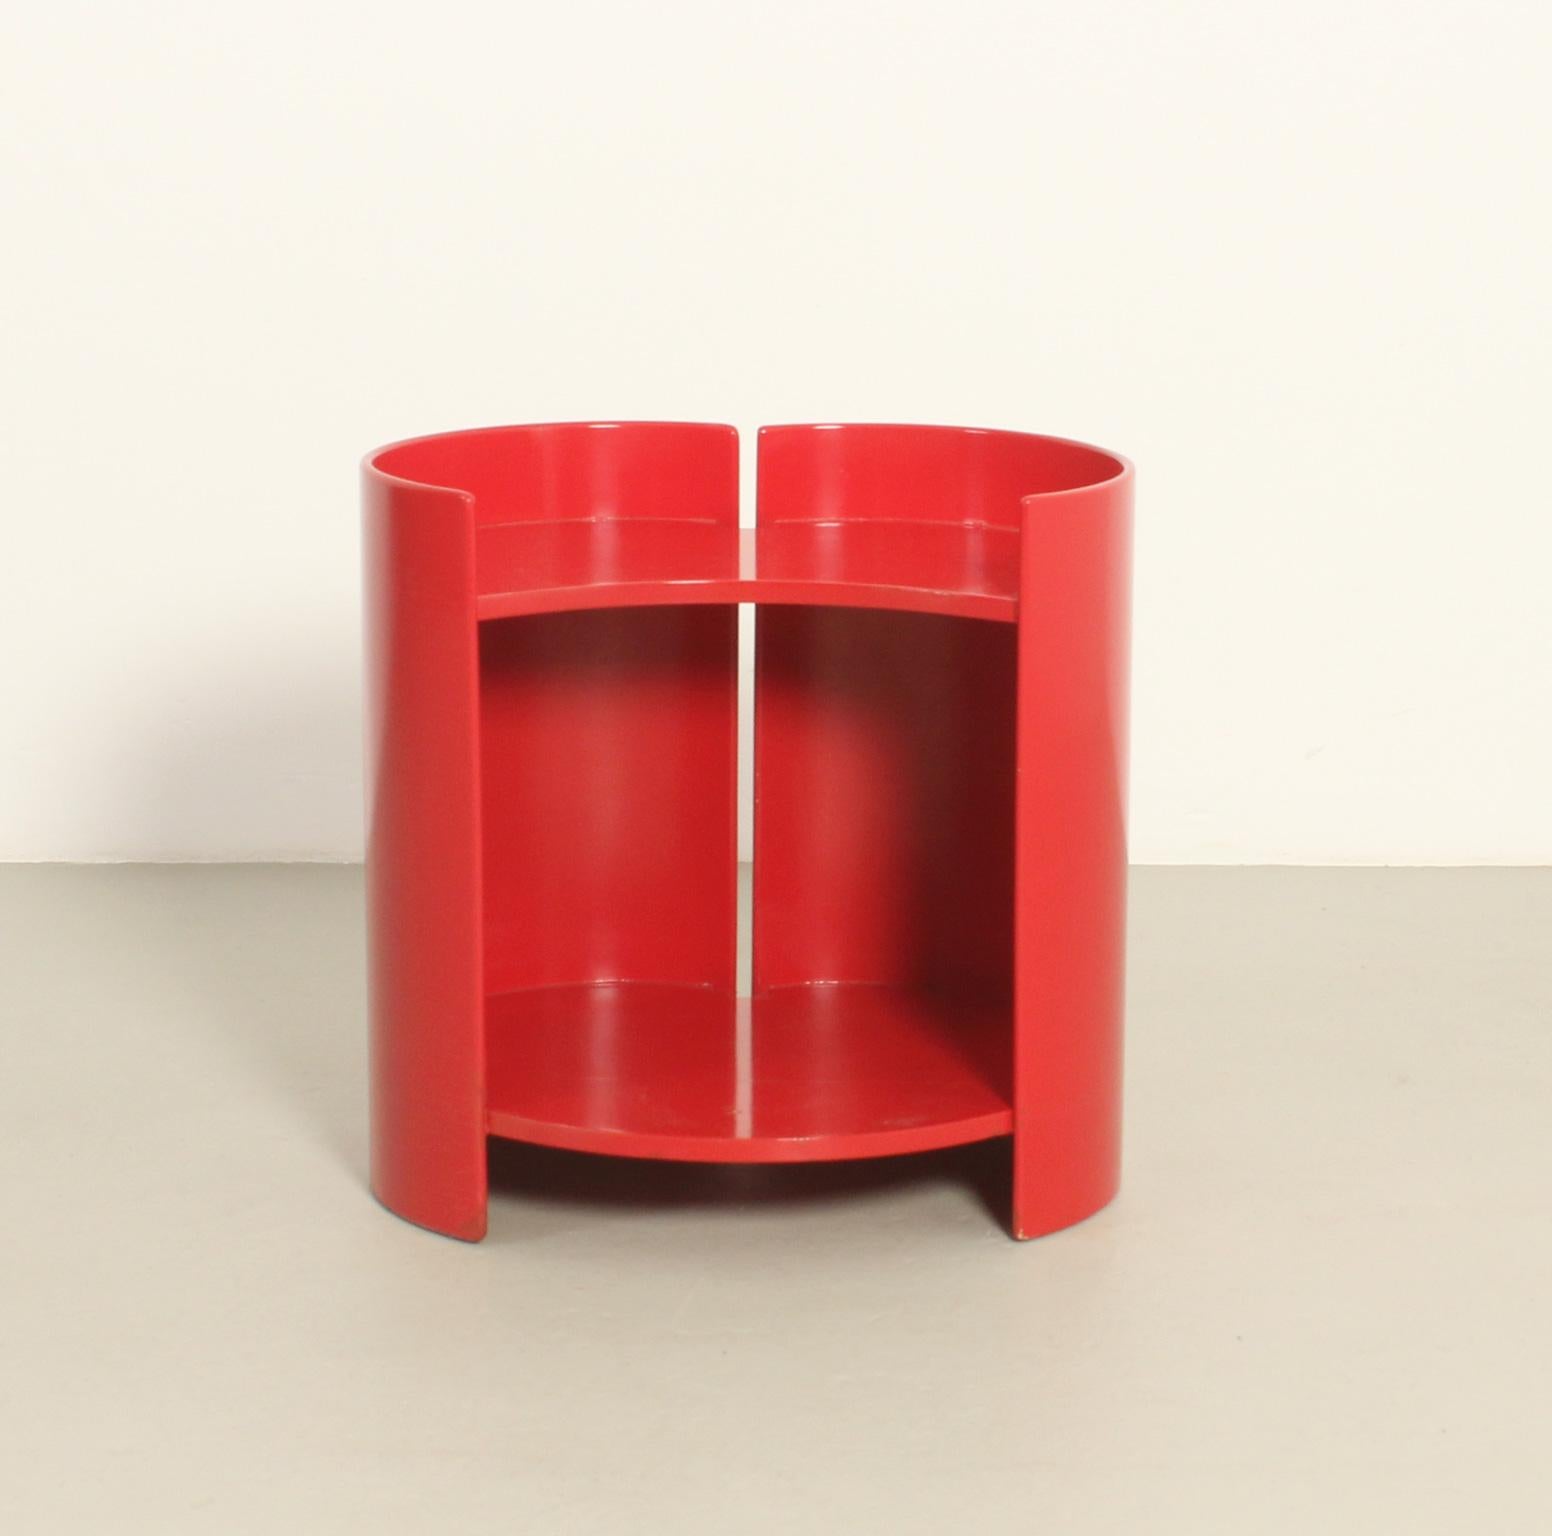 Gea side table designed in 1961 by Japanese architect and designer Kazuhide Takahama for Gavina, Italy. Laminated wood with red lacquered.